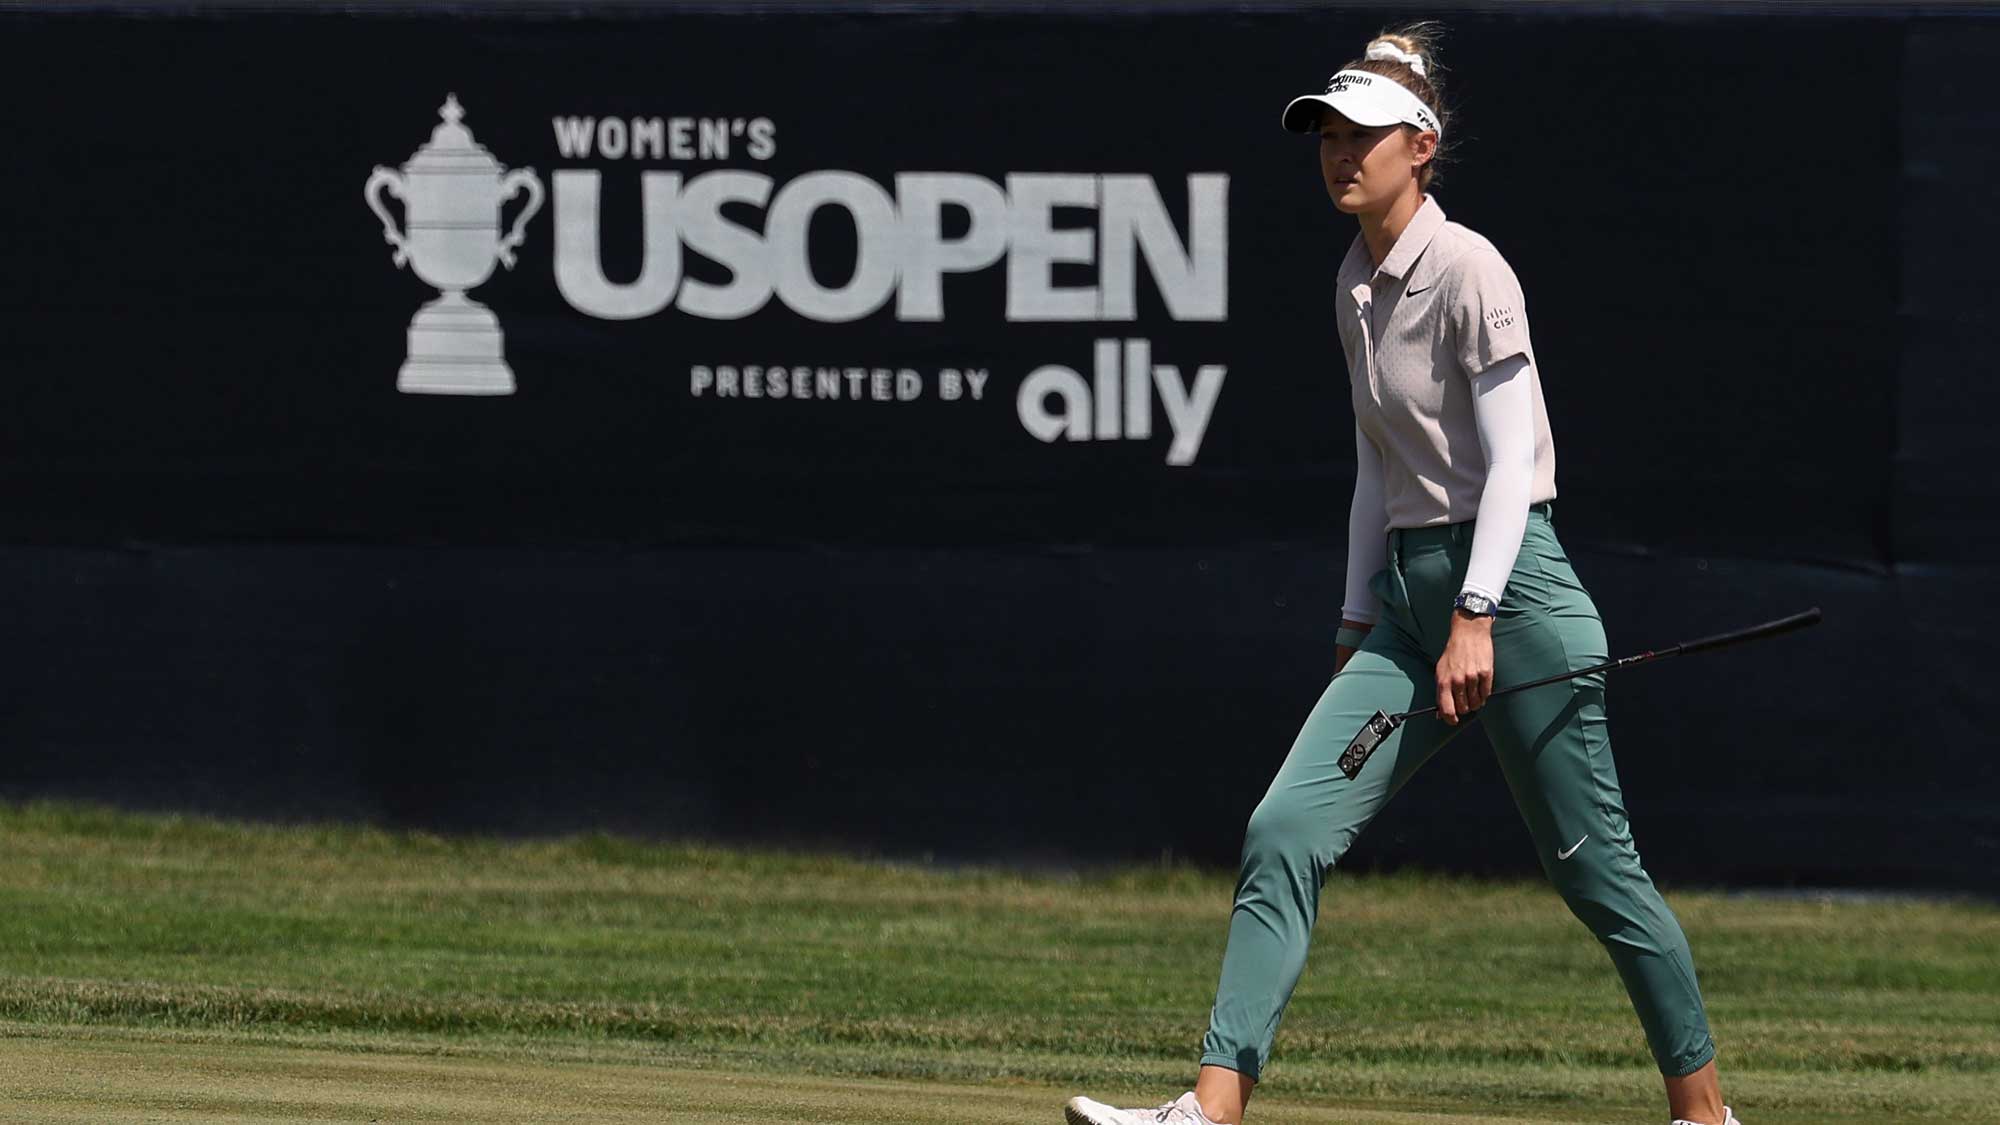 Challenging Morning Conditions Confound Field in First Round of U.S